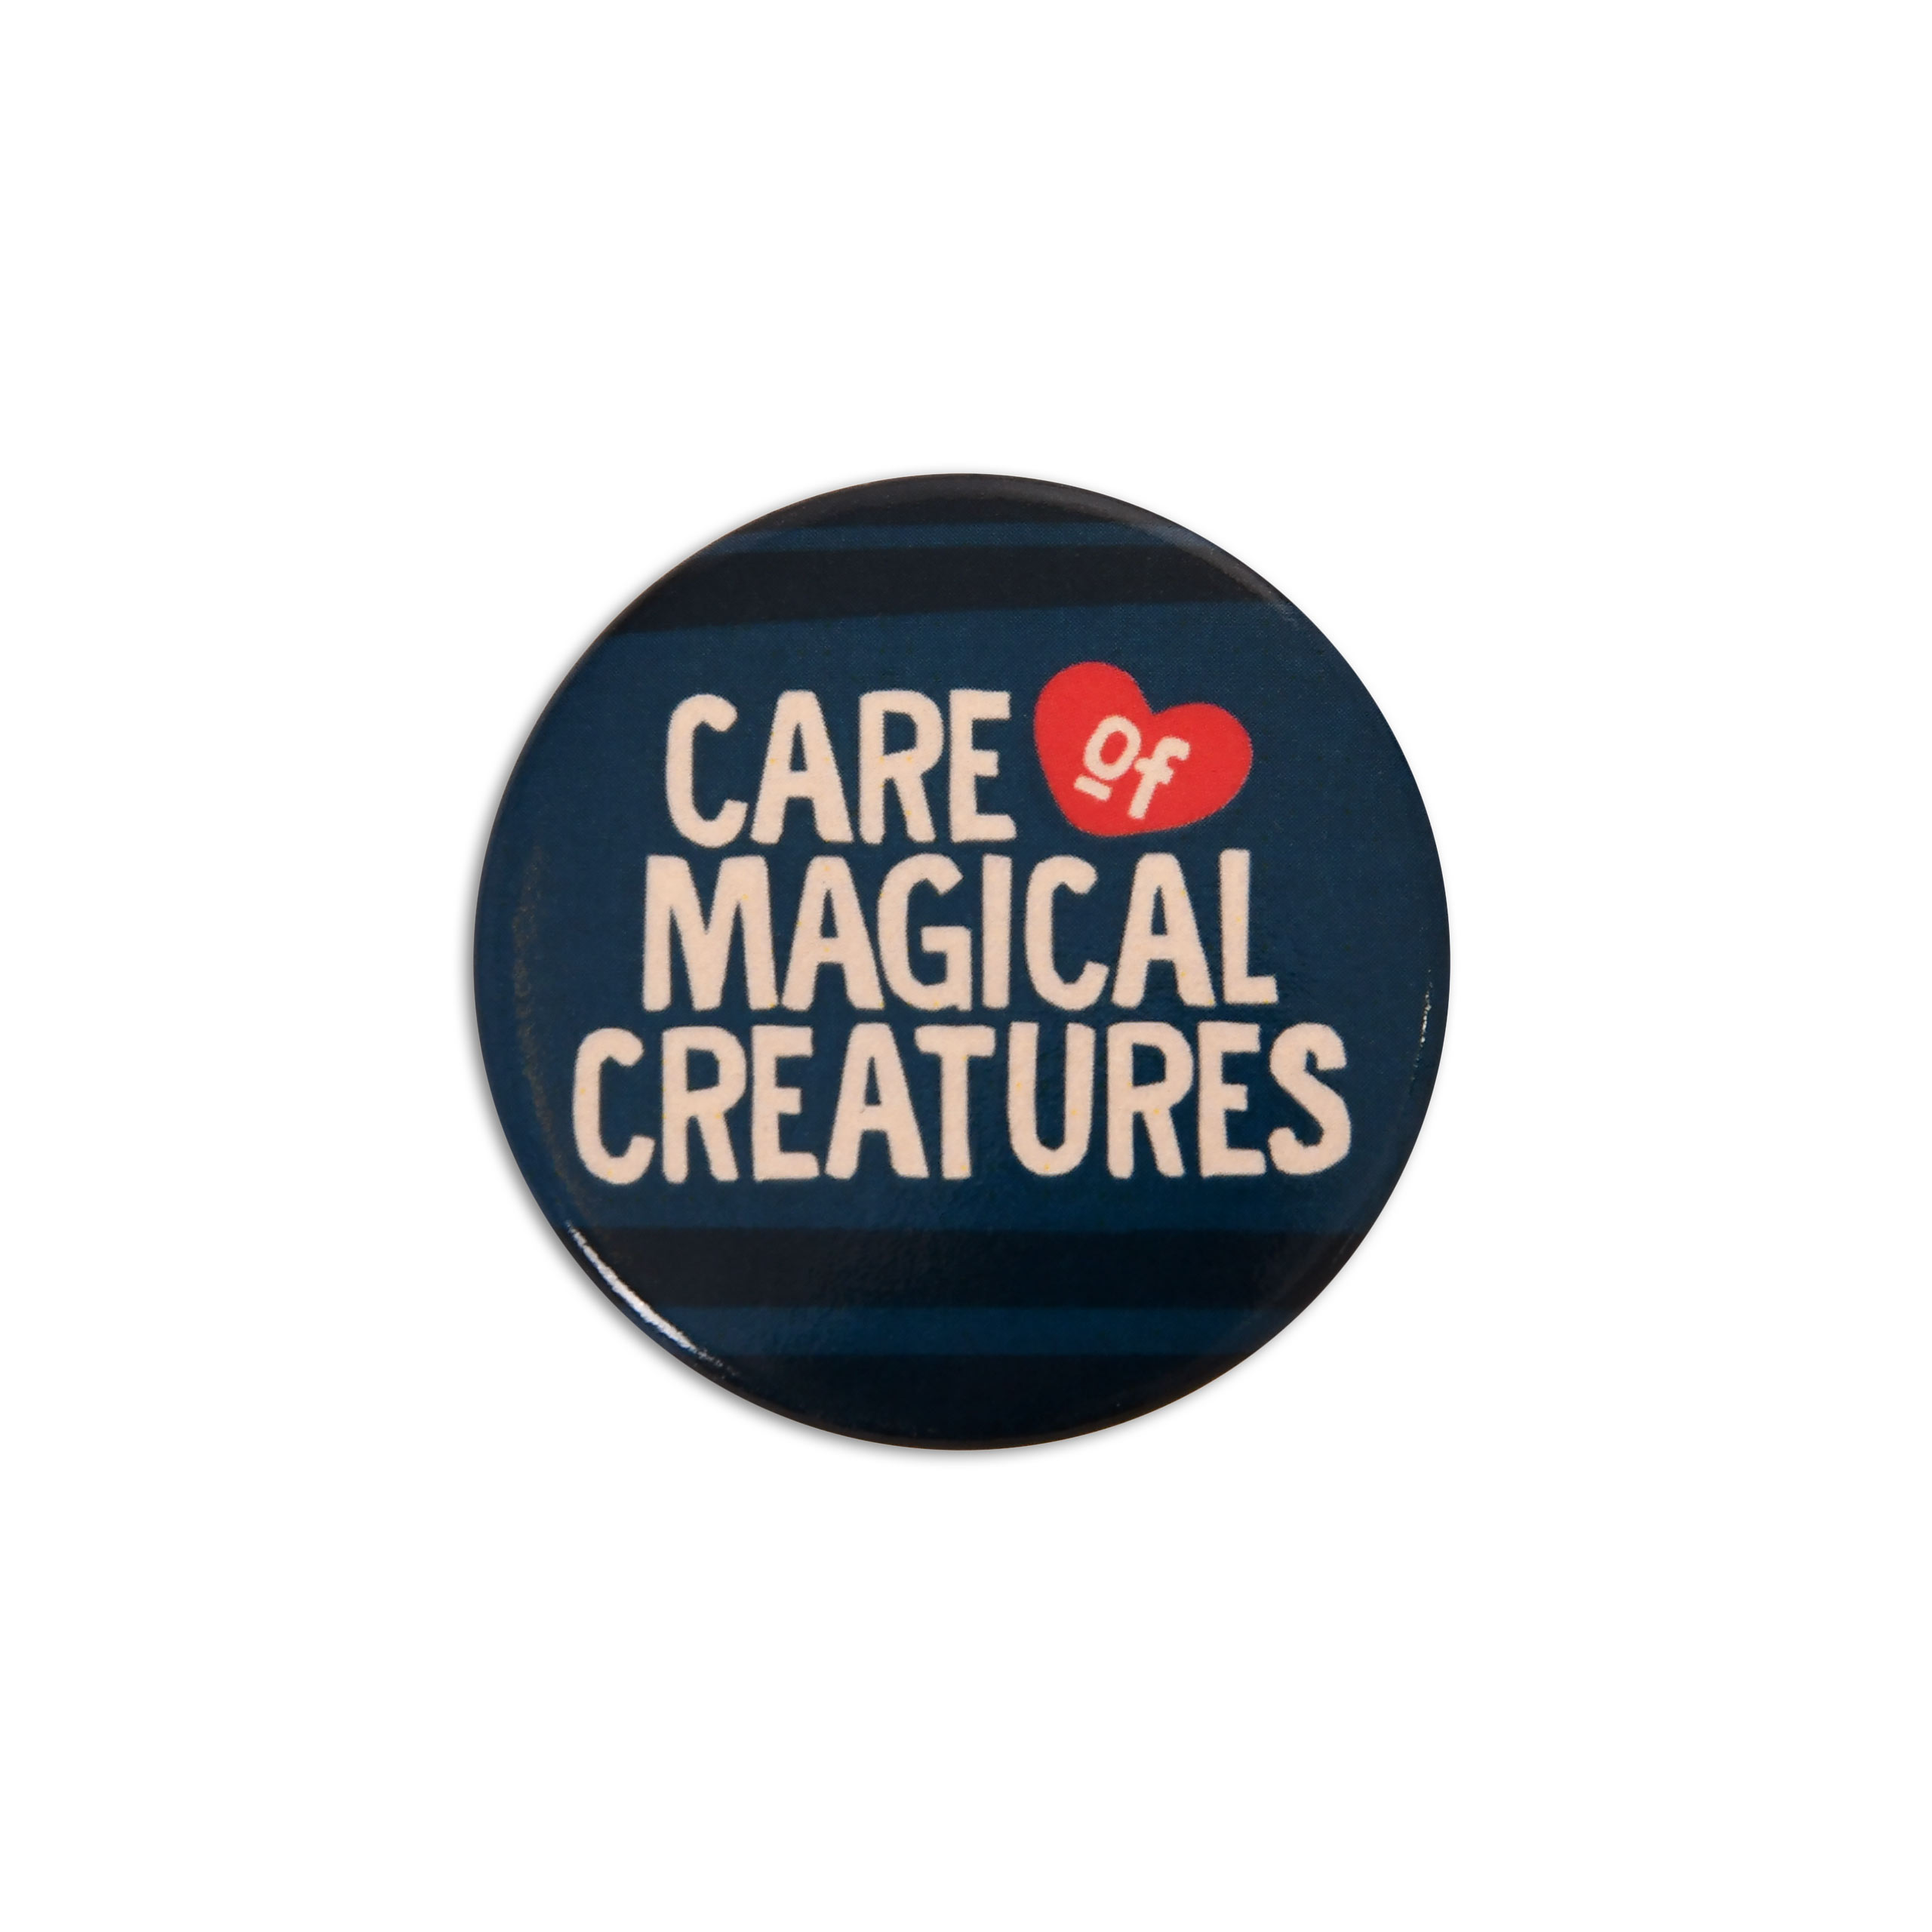 Care of Magical Creatures Button for Harry Potter Fans